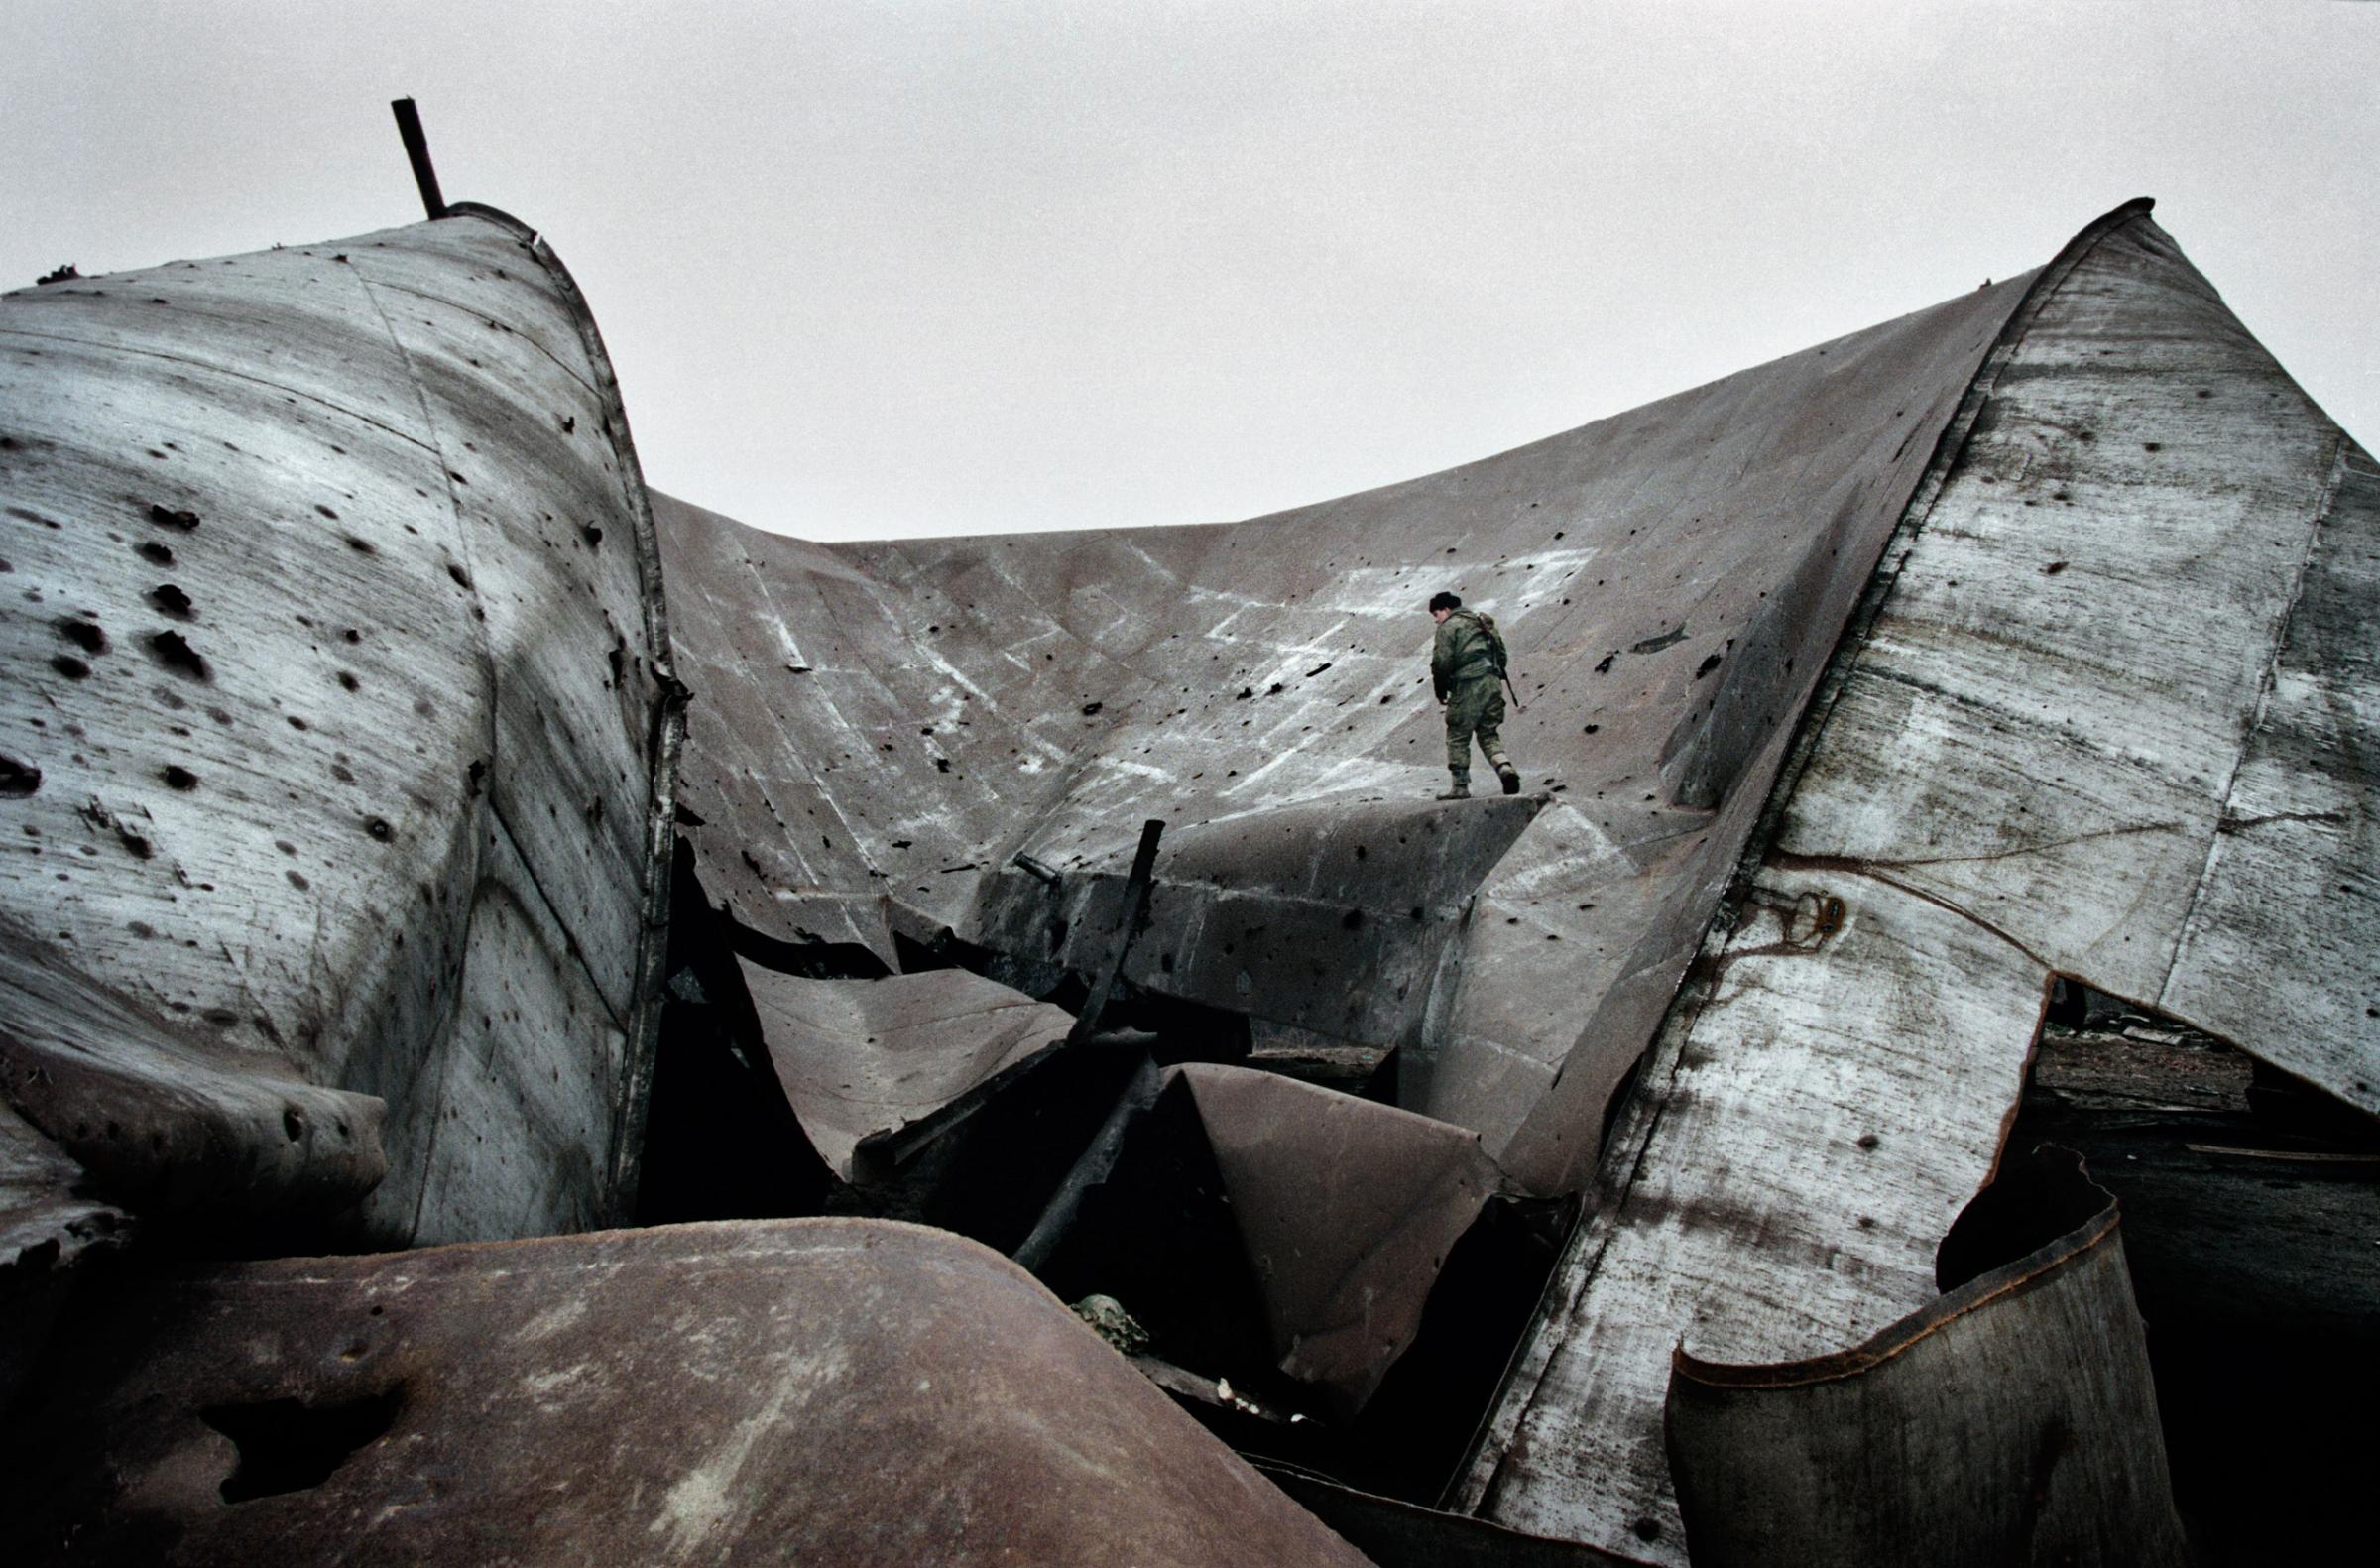 A russian soldier at an oil refinery storage facility that was destroyed in the first Chechen war in Tsentoroi, Chechnya, Dec. 1999.Yuri kozyrev—NOOR